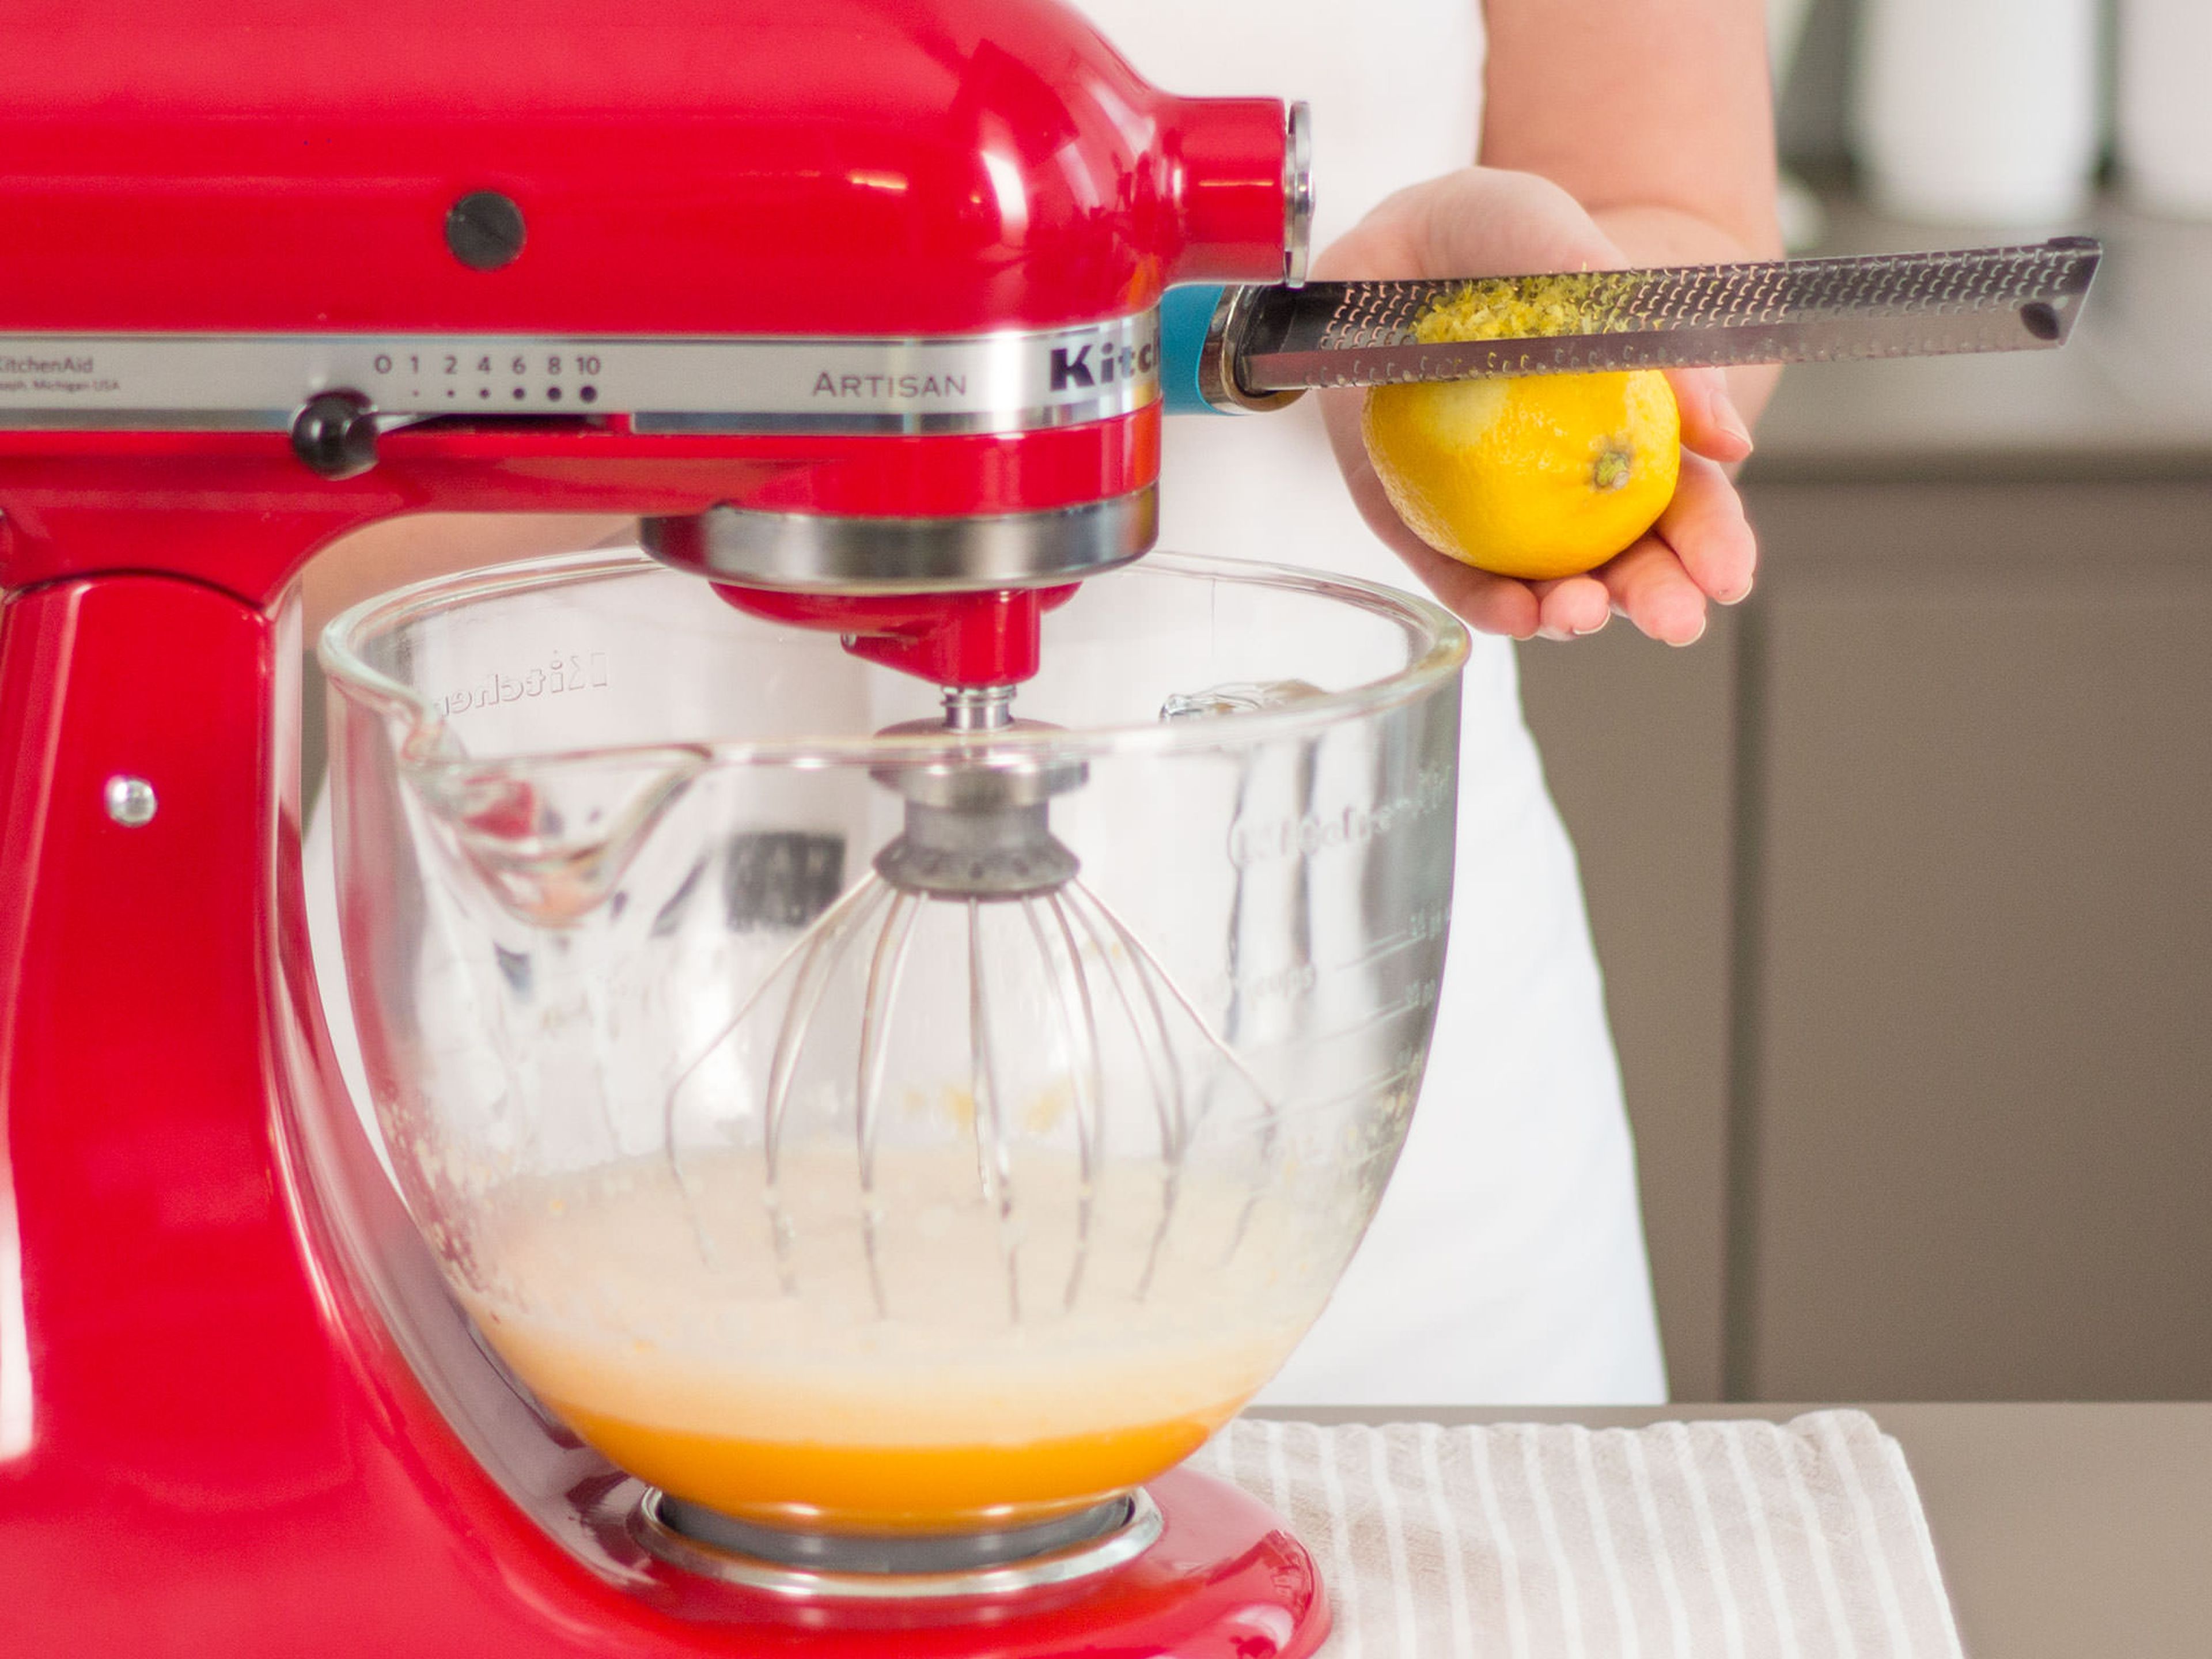 Preheat oven to 180°C/350°F. Add part of the eggs and the sugar to a standing mixer. Beat until the color of the mixture is very pale and it has grown in volume. Add lemon zest. Sift flour, cornstarch, cocoa powder, and salt into the mixer bowl. Beat until a smooth dough forms.